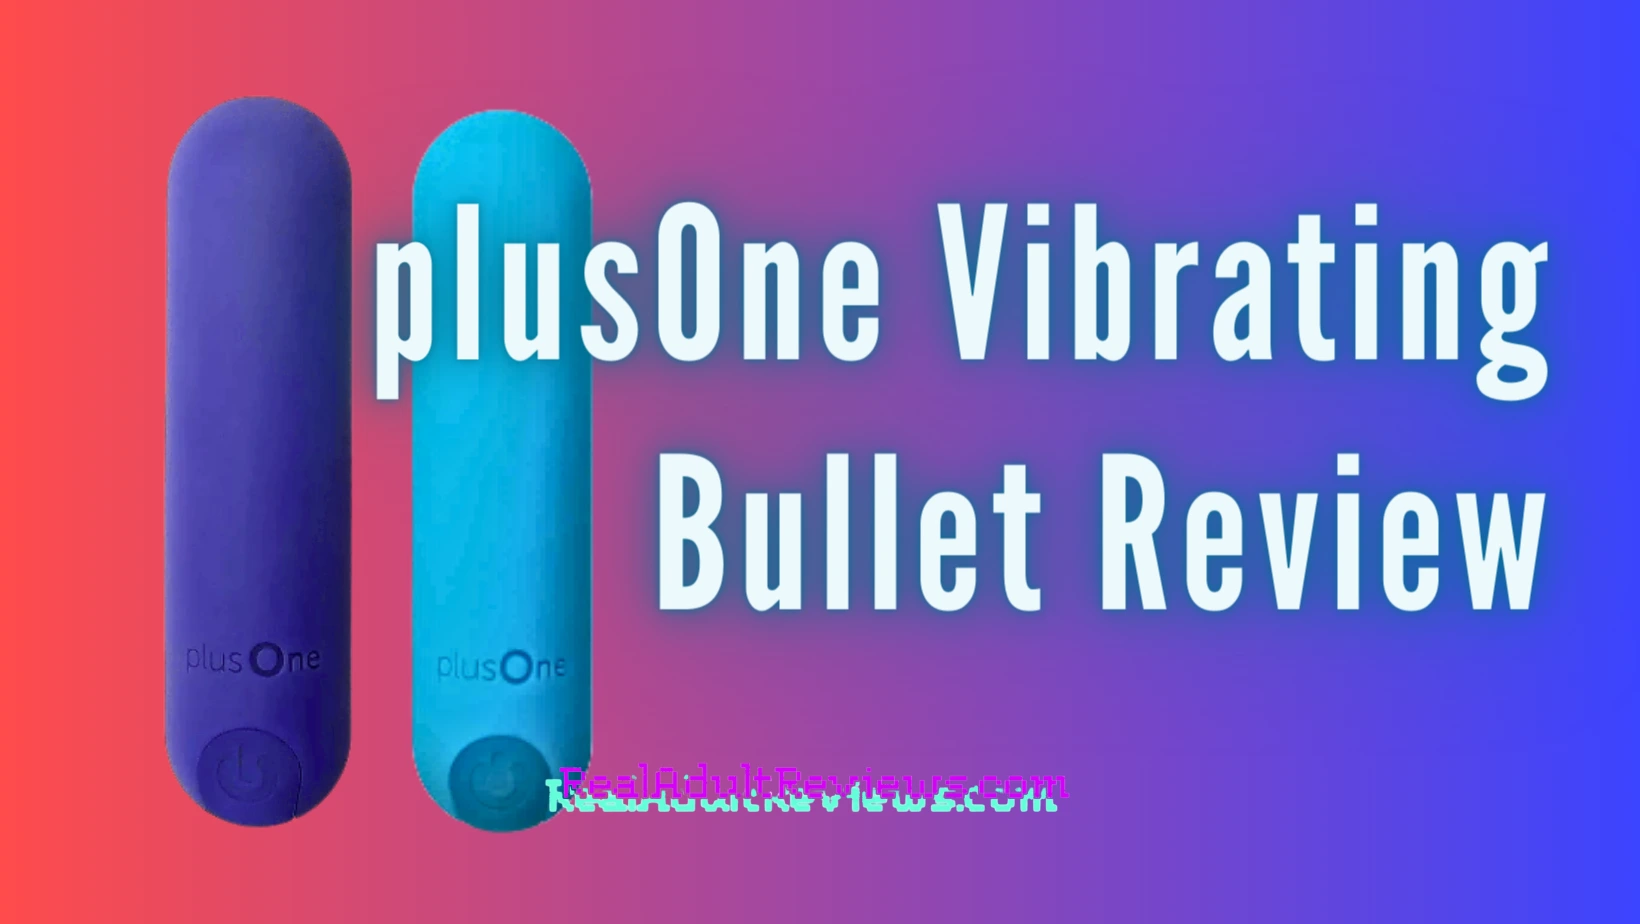 Read The PlusOne Vibrating Bullet Review: Why Does She Love Traveling?